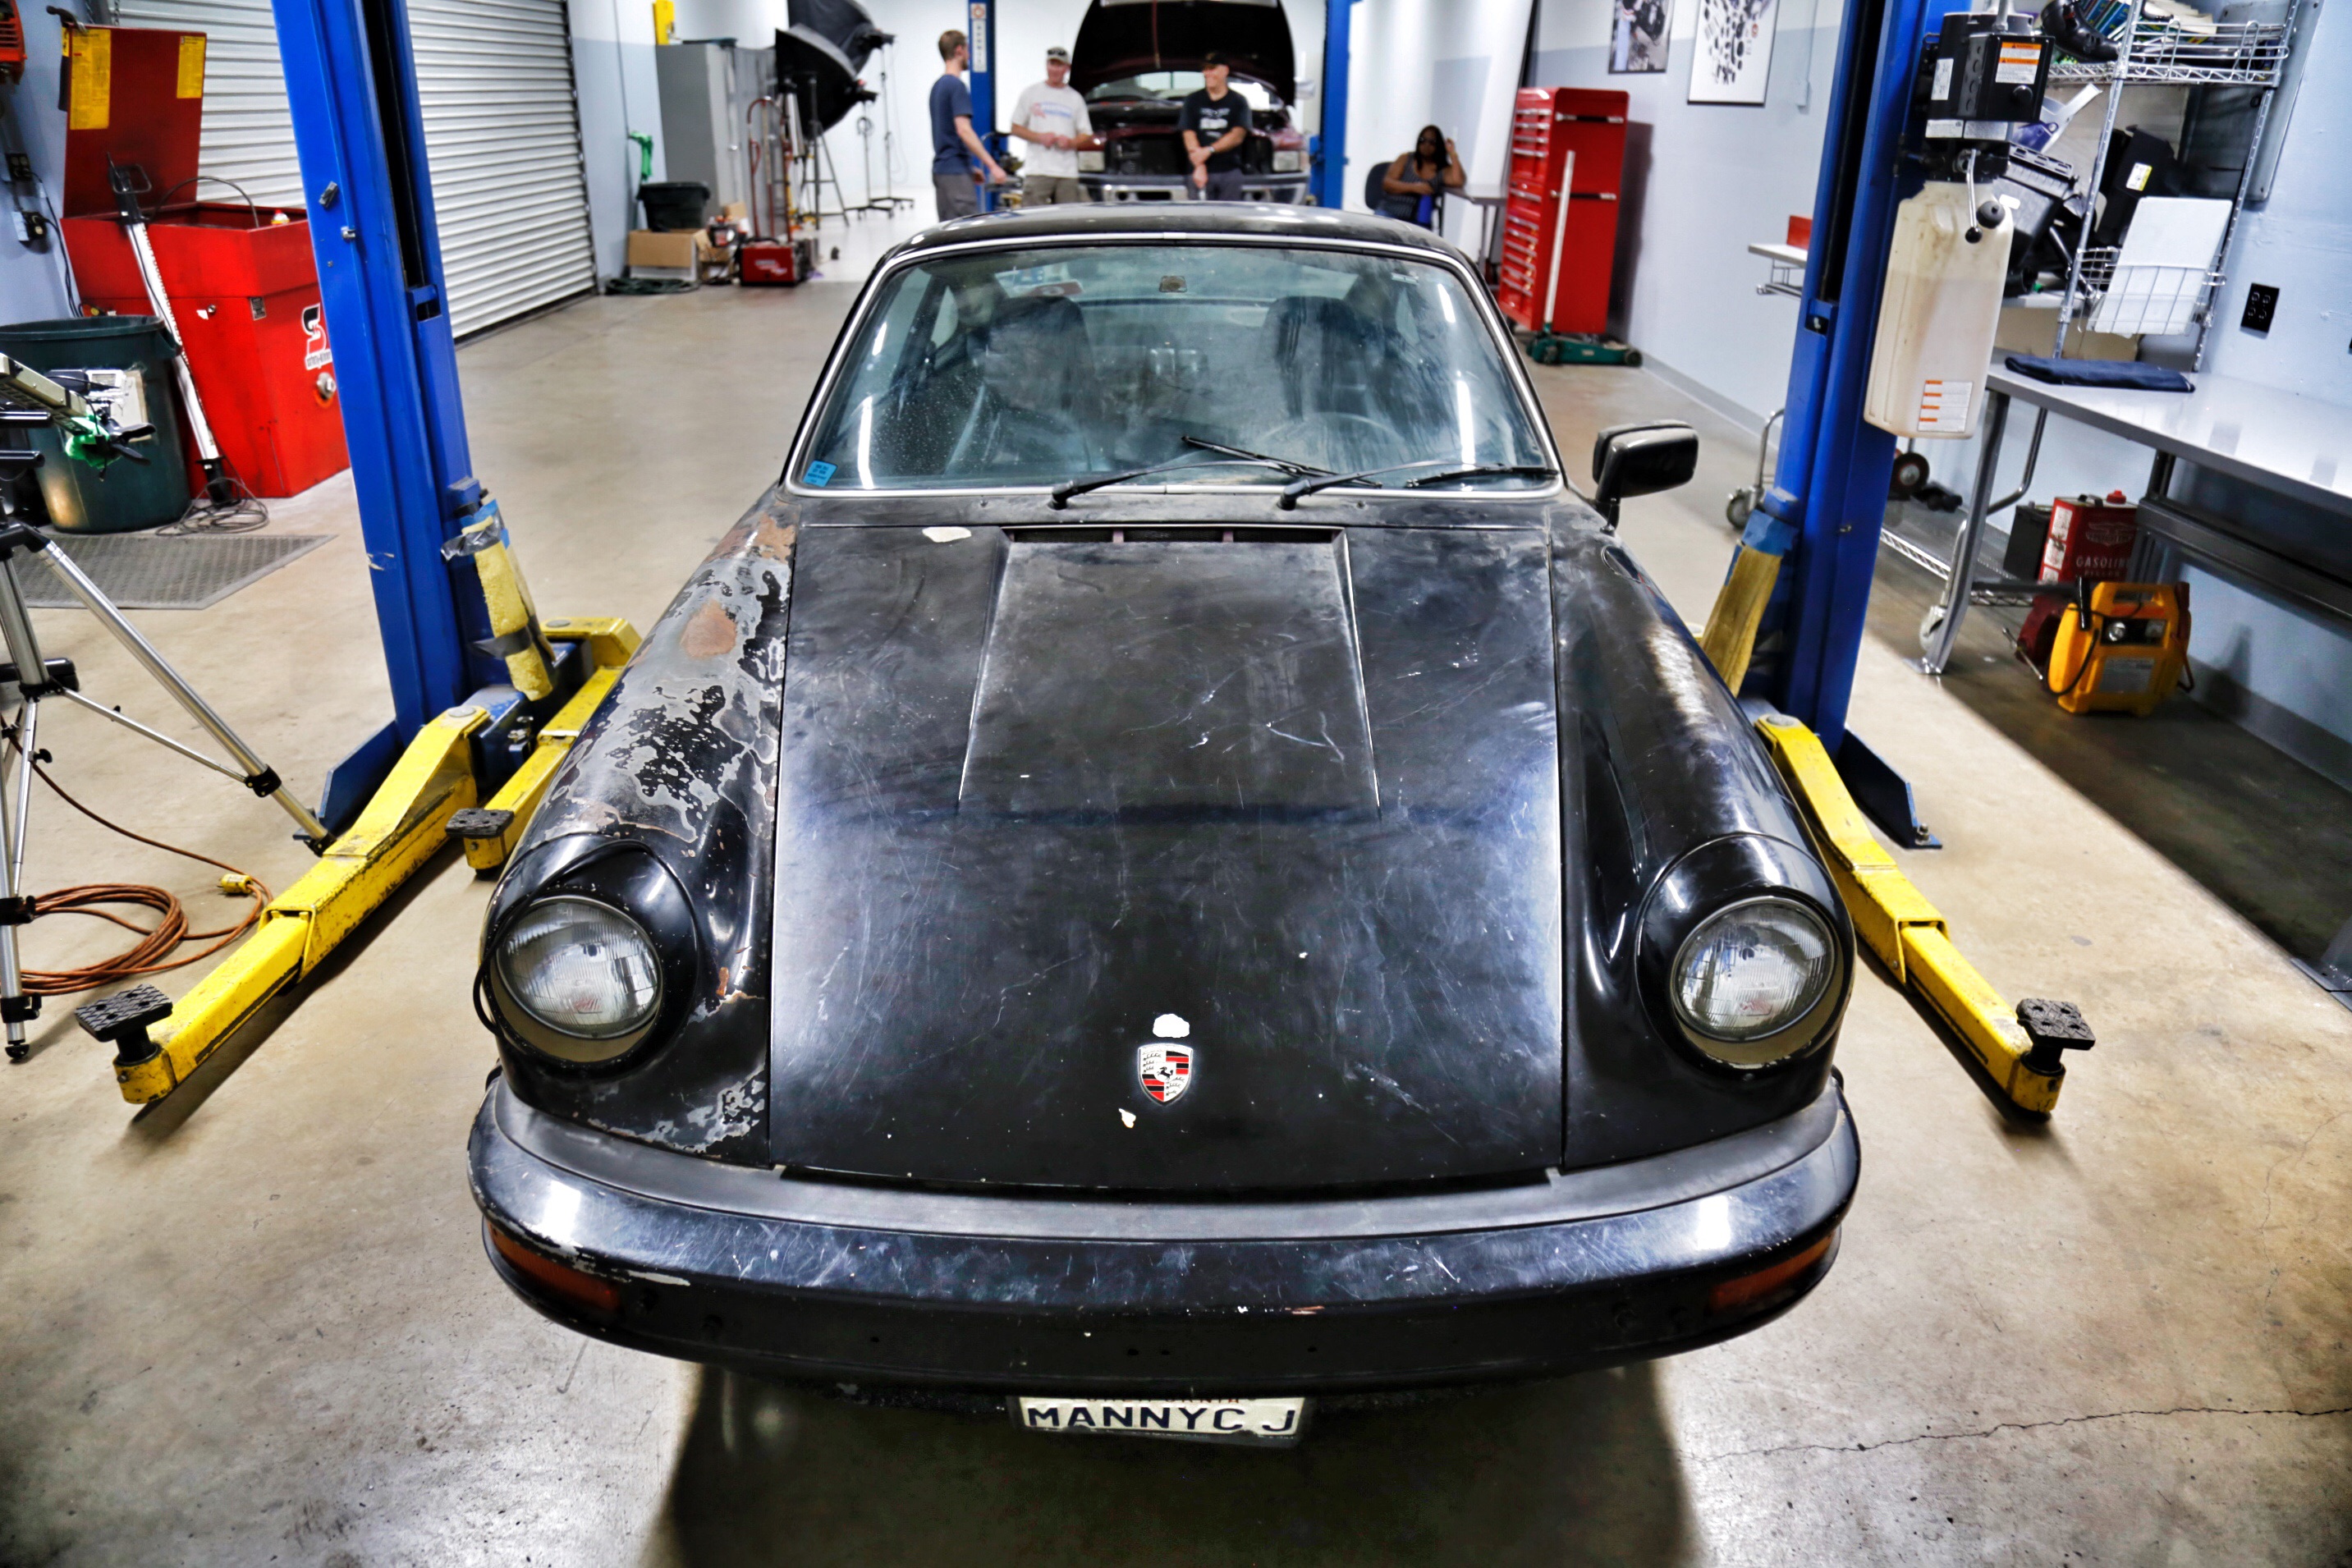 Project Stork: This 1977 Porsche 911S Has an Awesome Backstory